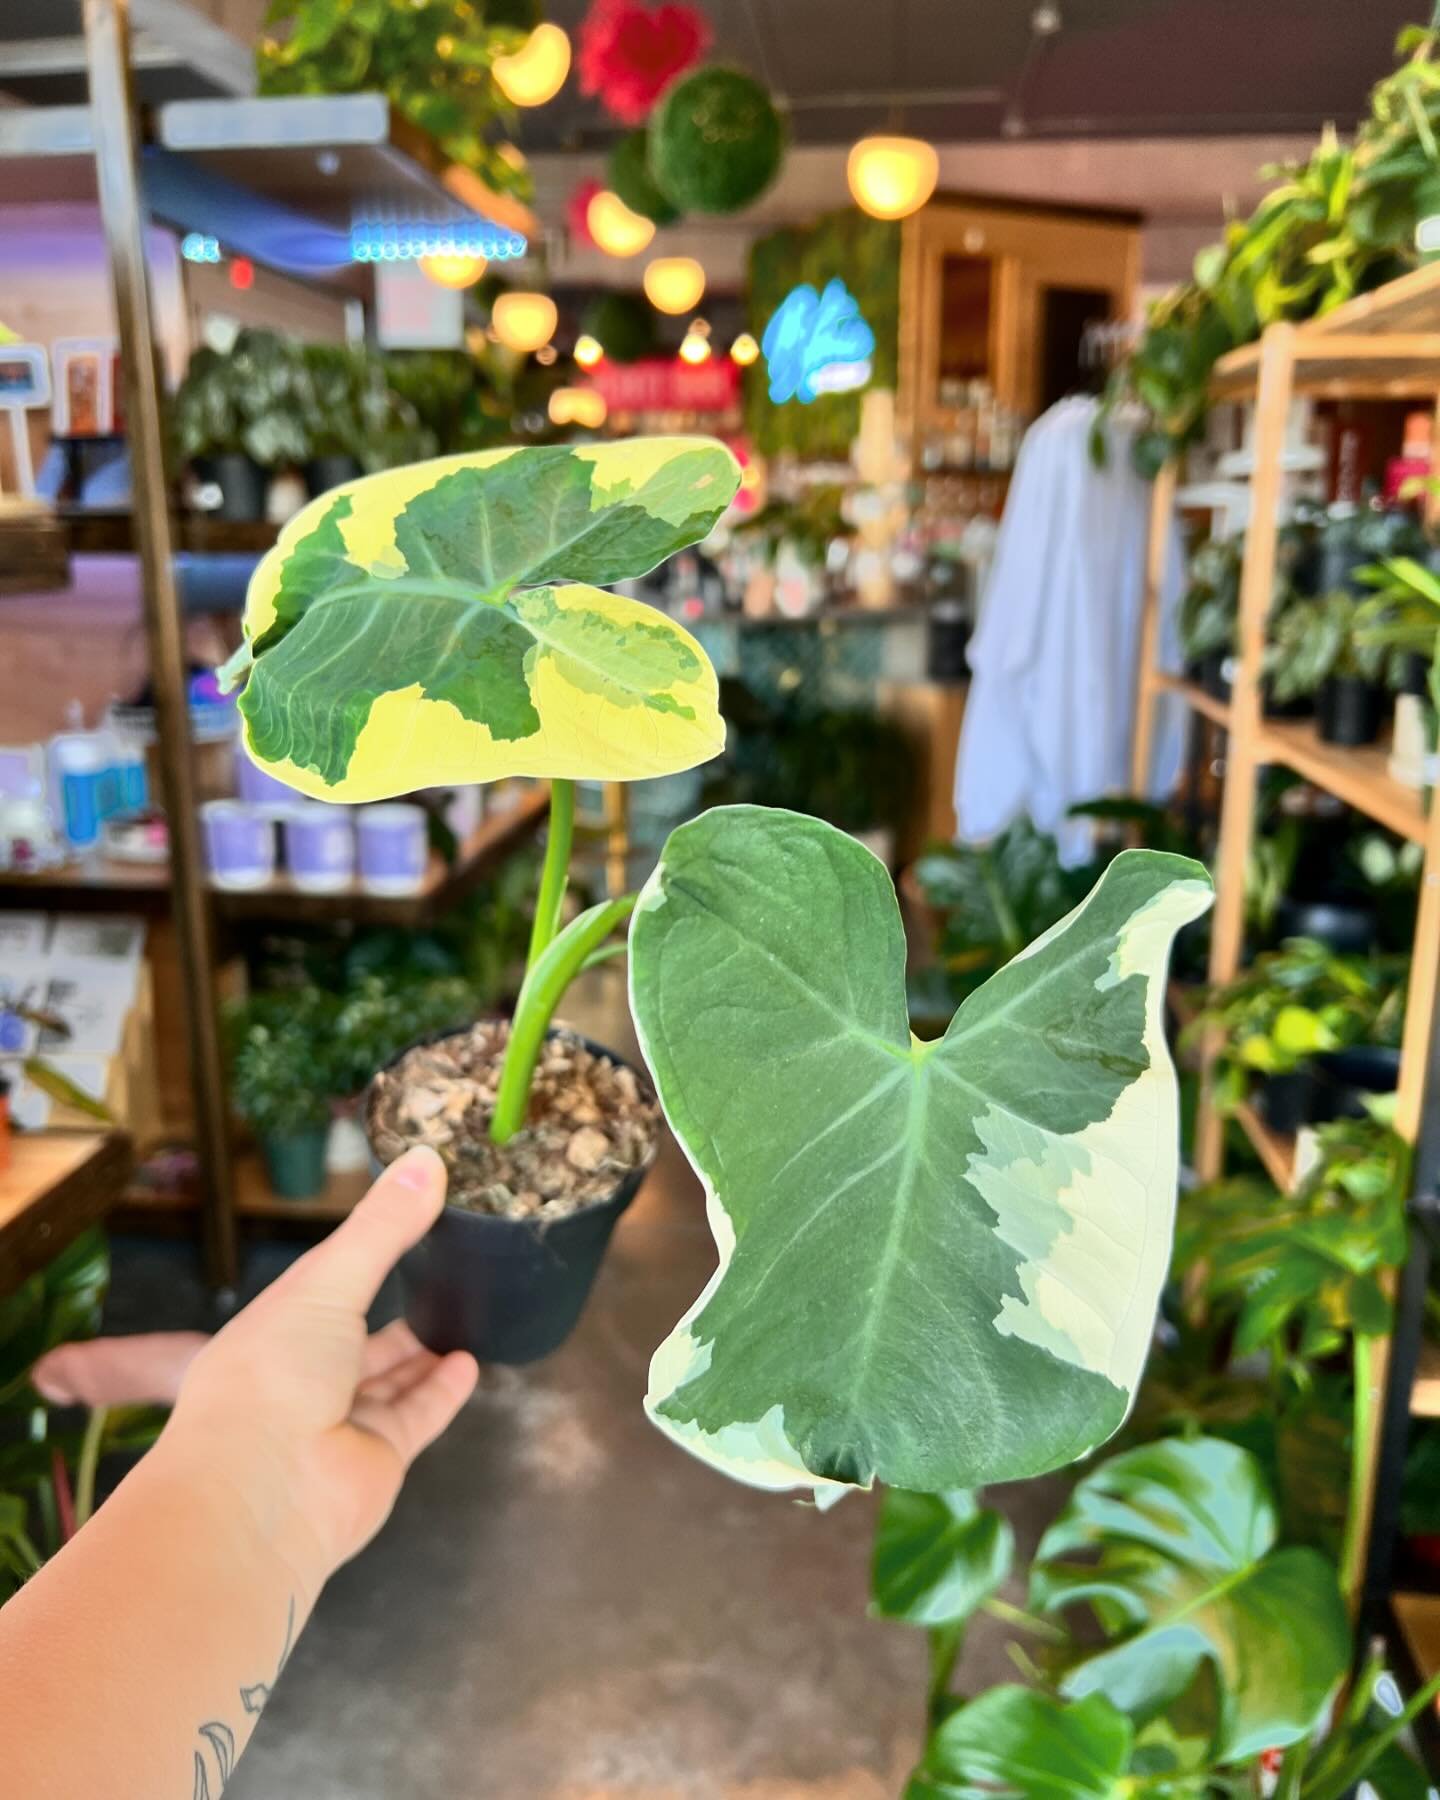 Shopping made easy when you come to GROW🌿 

New plants are here along with other fun artist items and merch! 

Hours: 
Wednesday- 9-6pm
Thursday- 9-8pm
Friday- 9-10pm
Saturday- 9-10pm
Sunday- 10-6pm